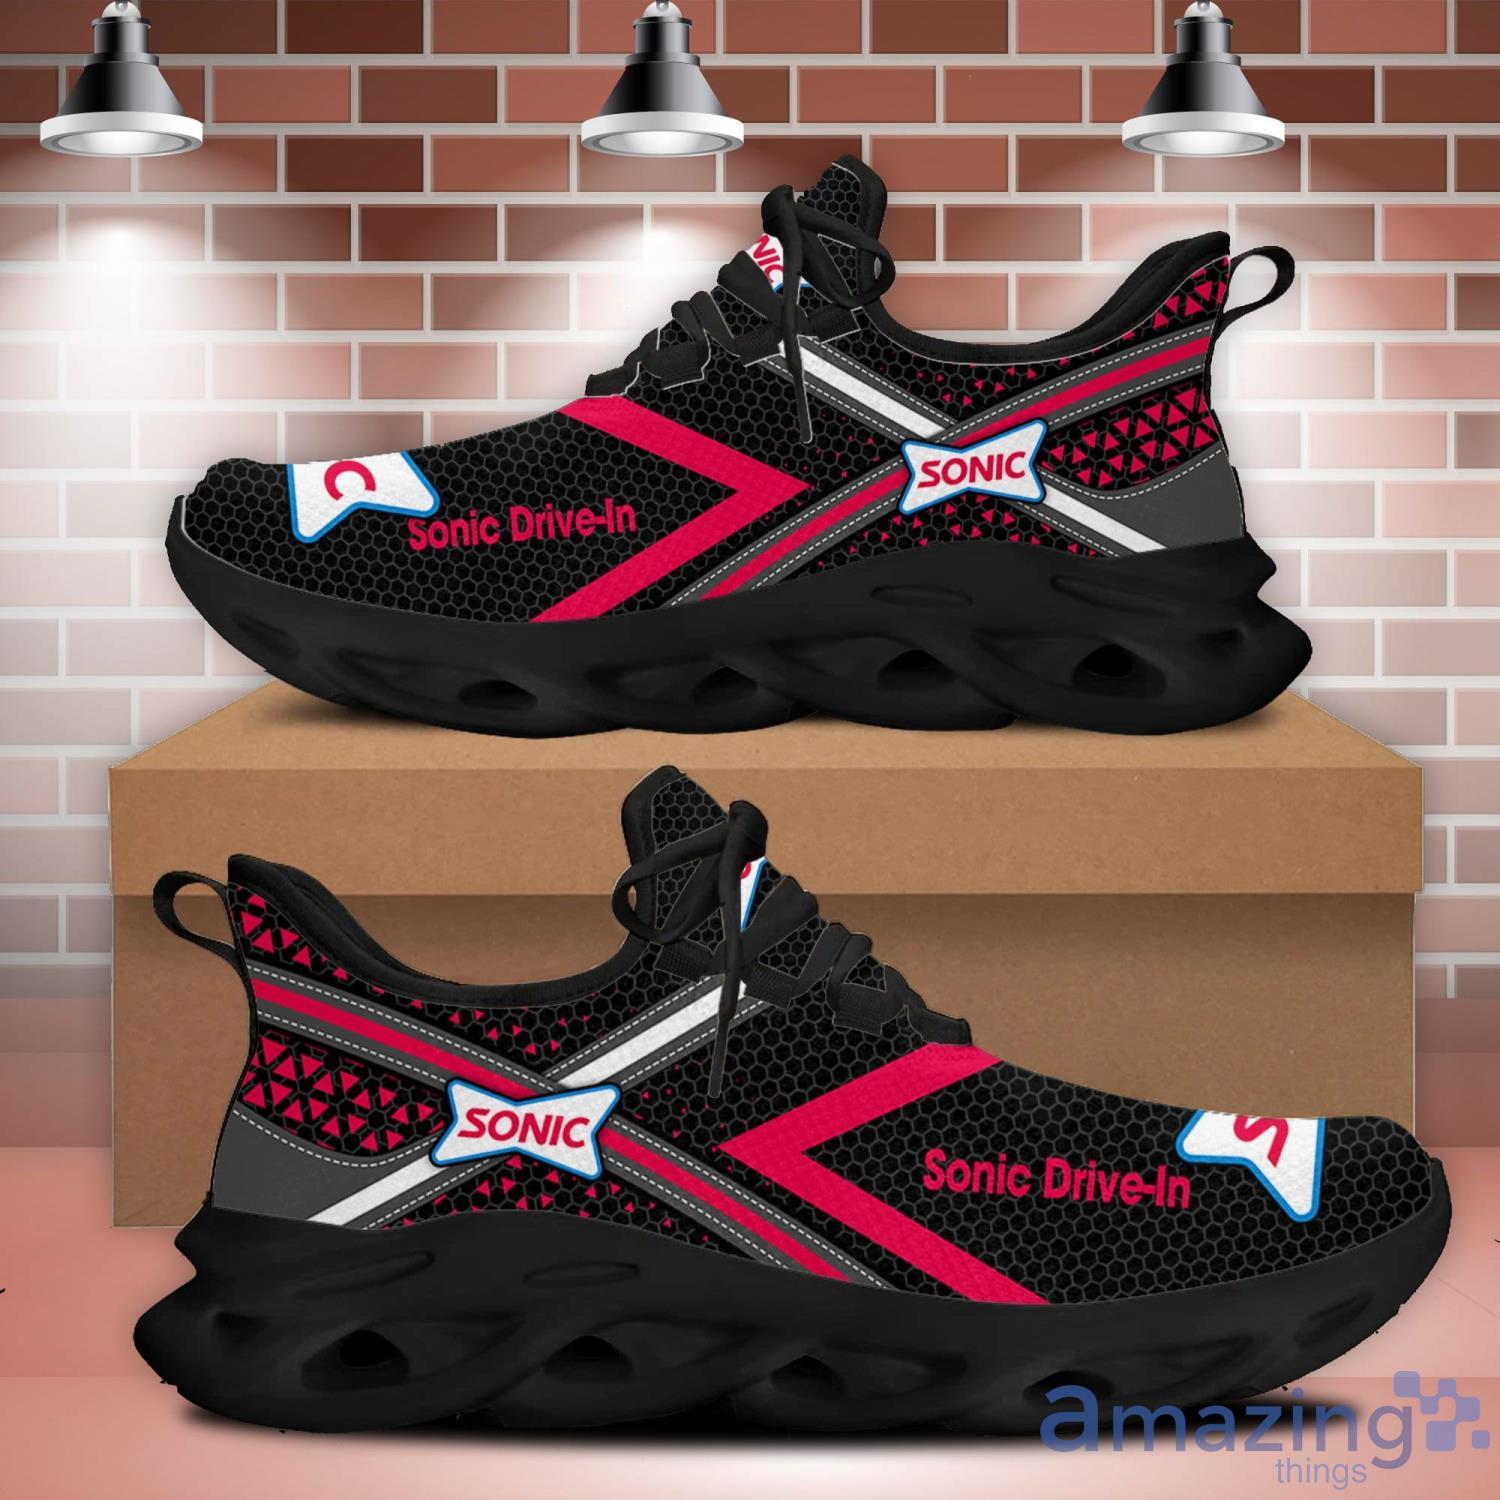 Sonic Drive-In Sneakers Max Soul Shoes Nice Sports Shoes For Men And Women Product Photo 1